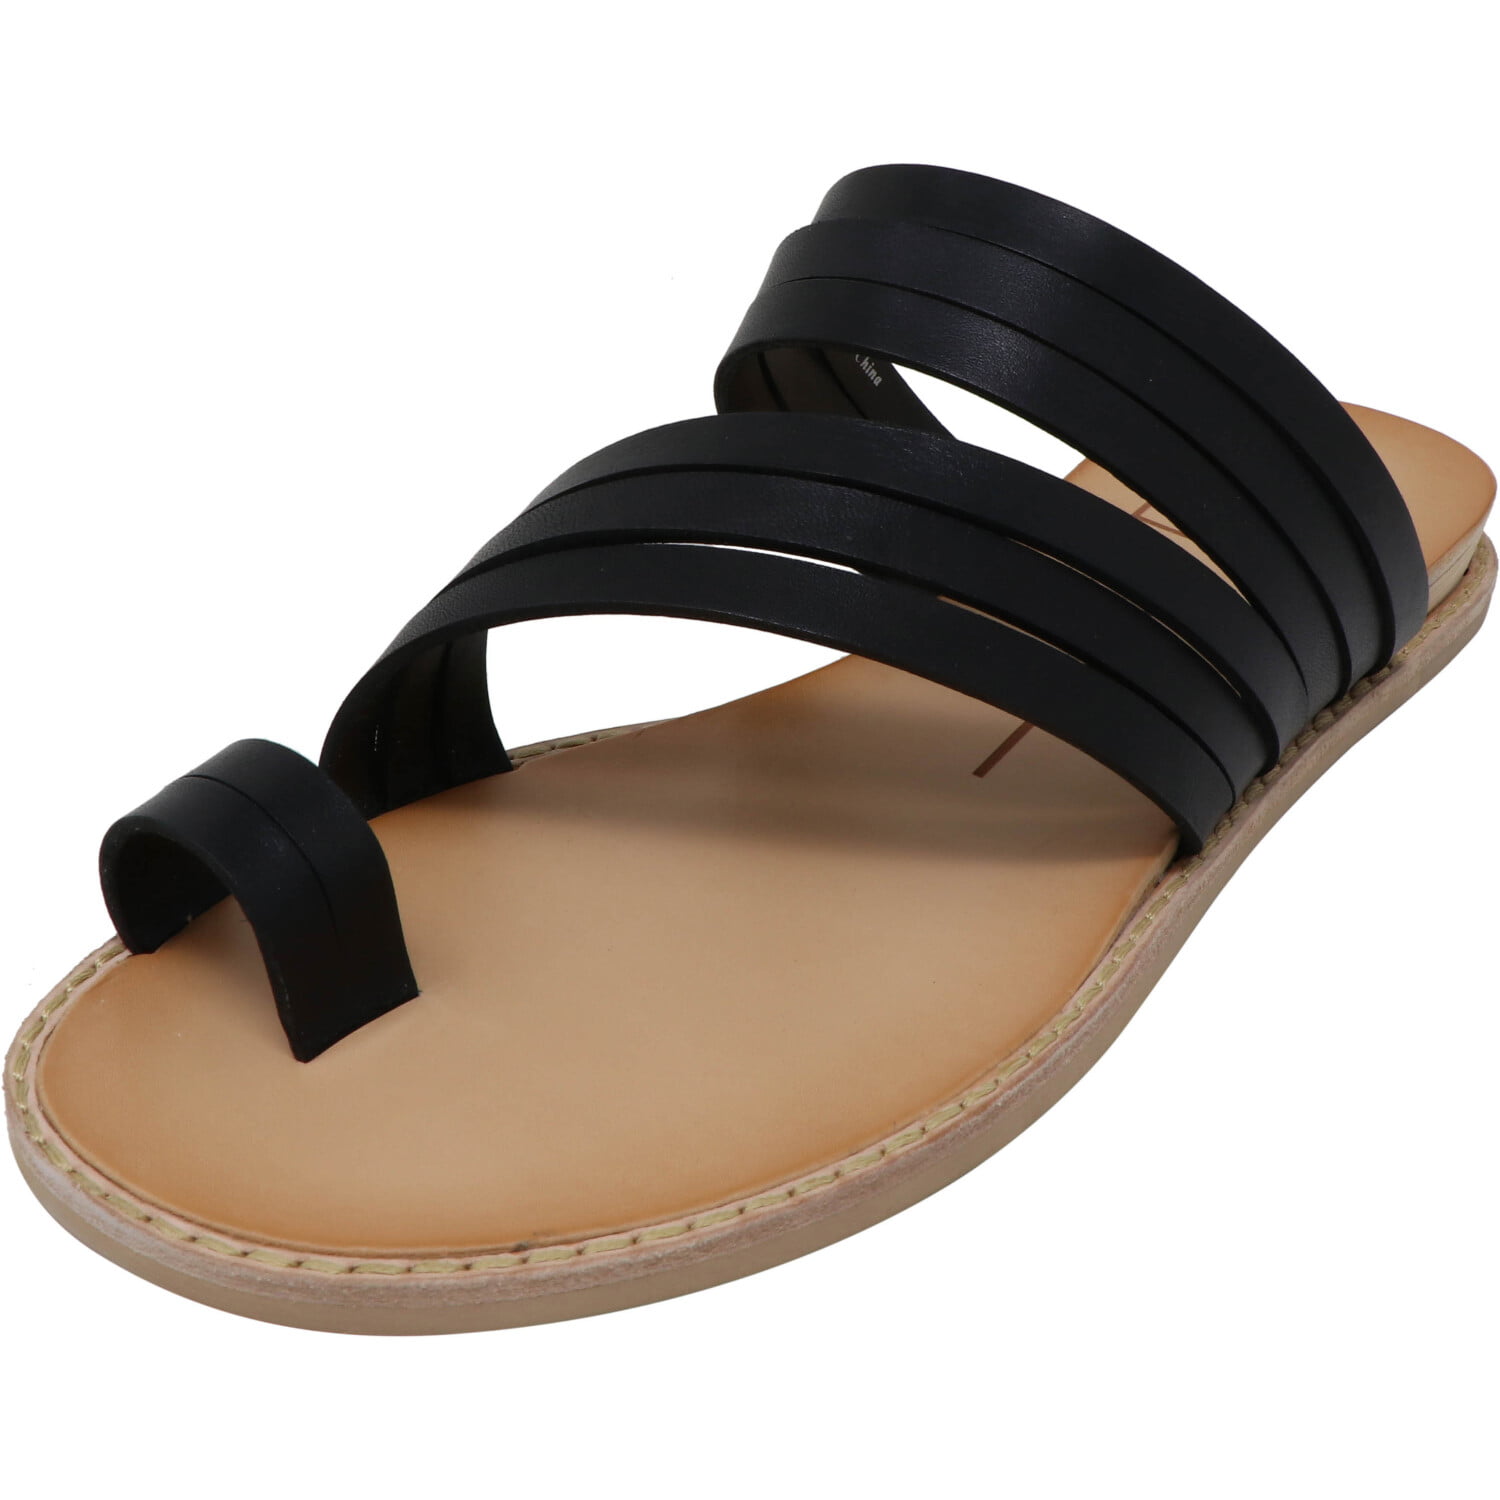 Details about   Dolce Vita Women's Nelly Flat Sandal